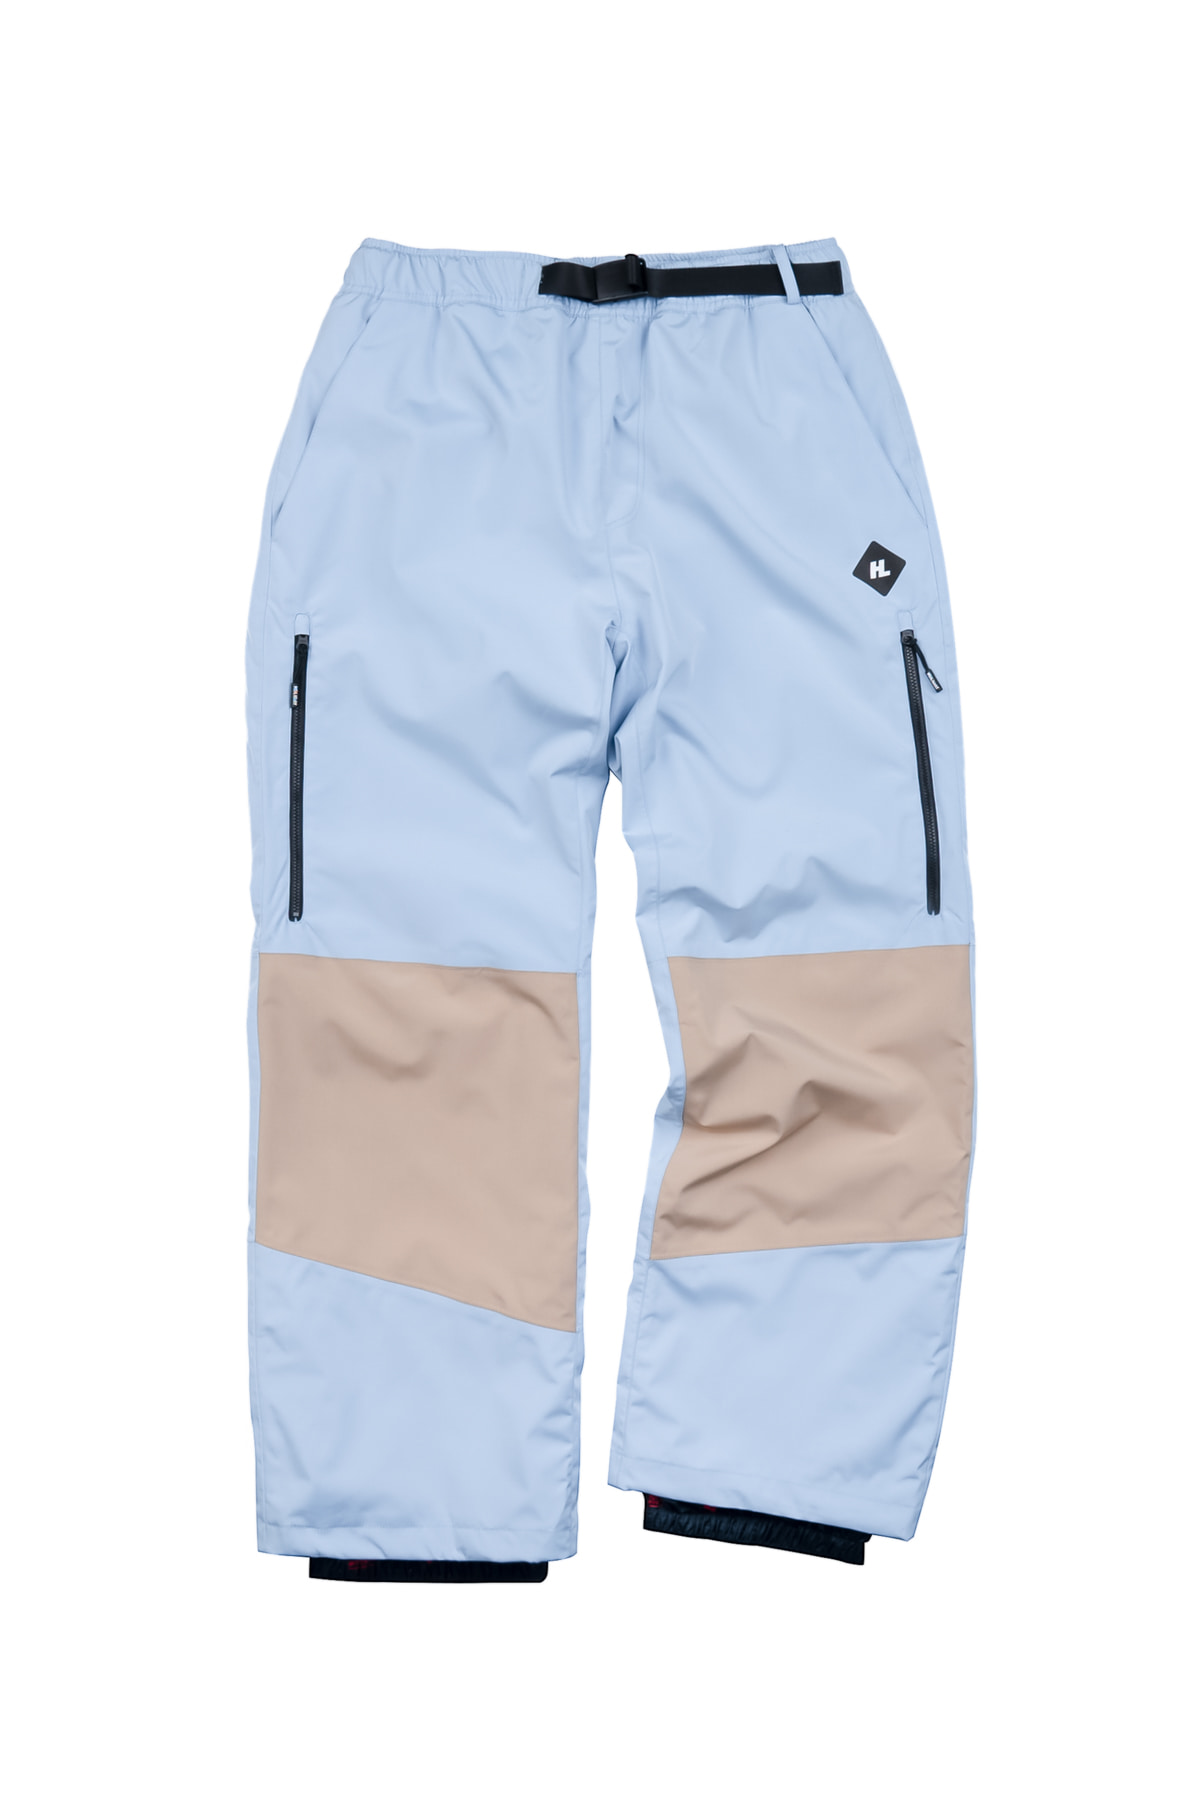 ULTIMA 2L PANTS[2layer]-POWDER BLUEHOLIDAY OUTERWEAR